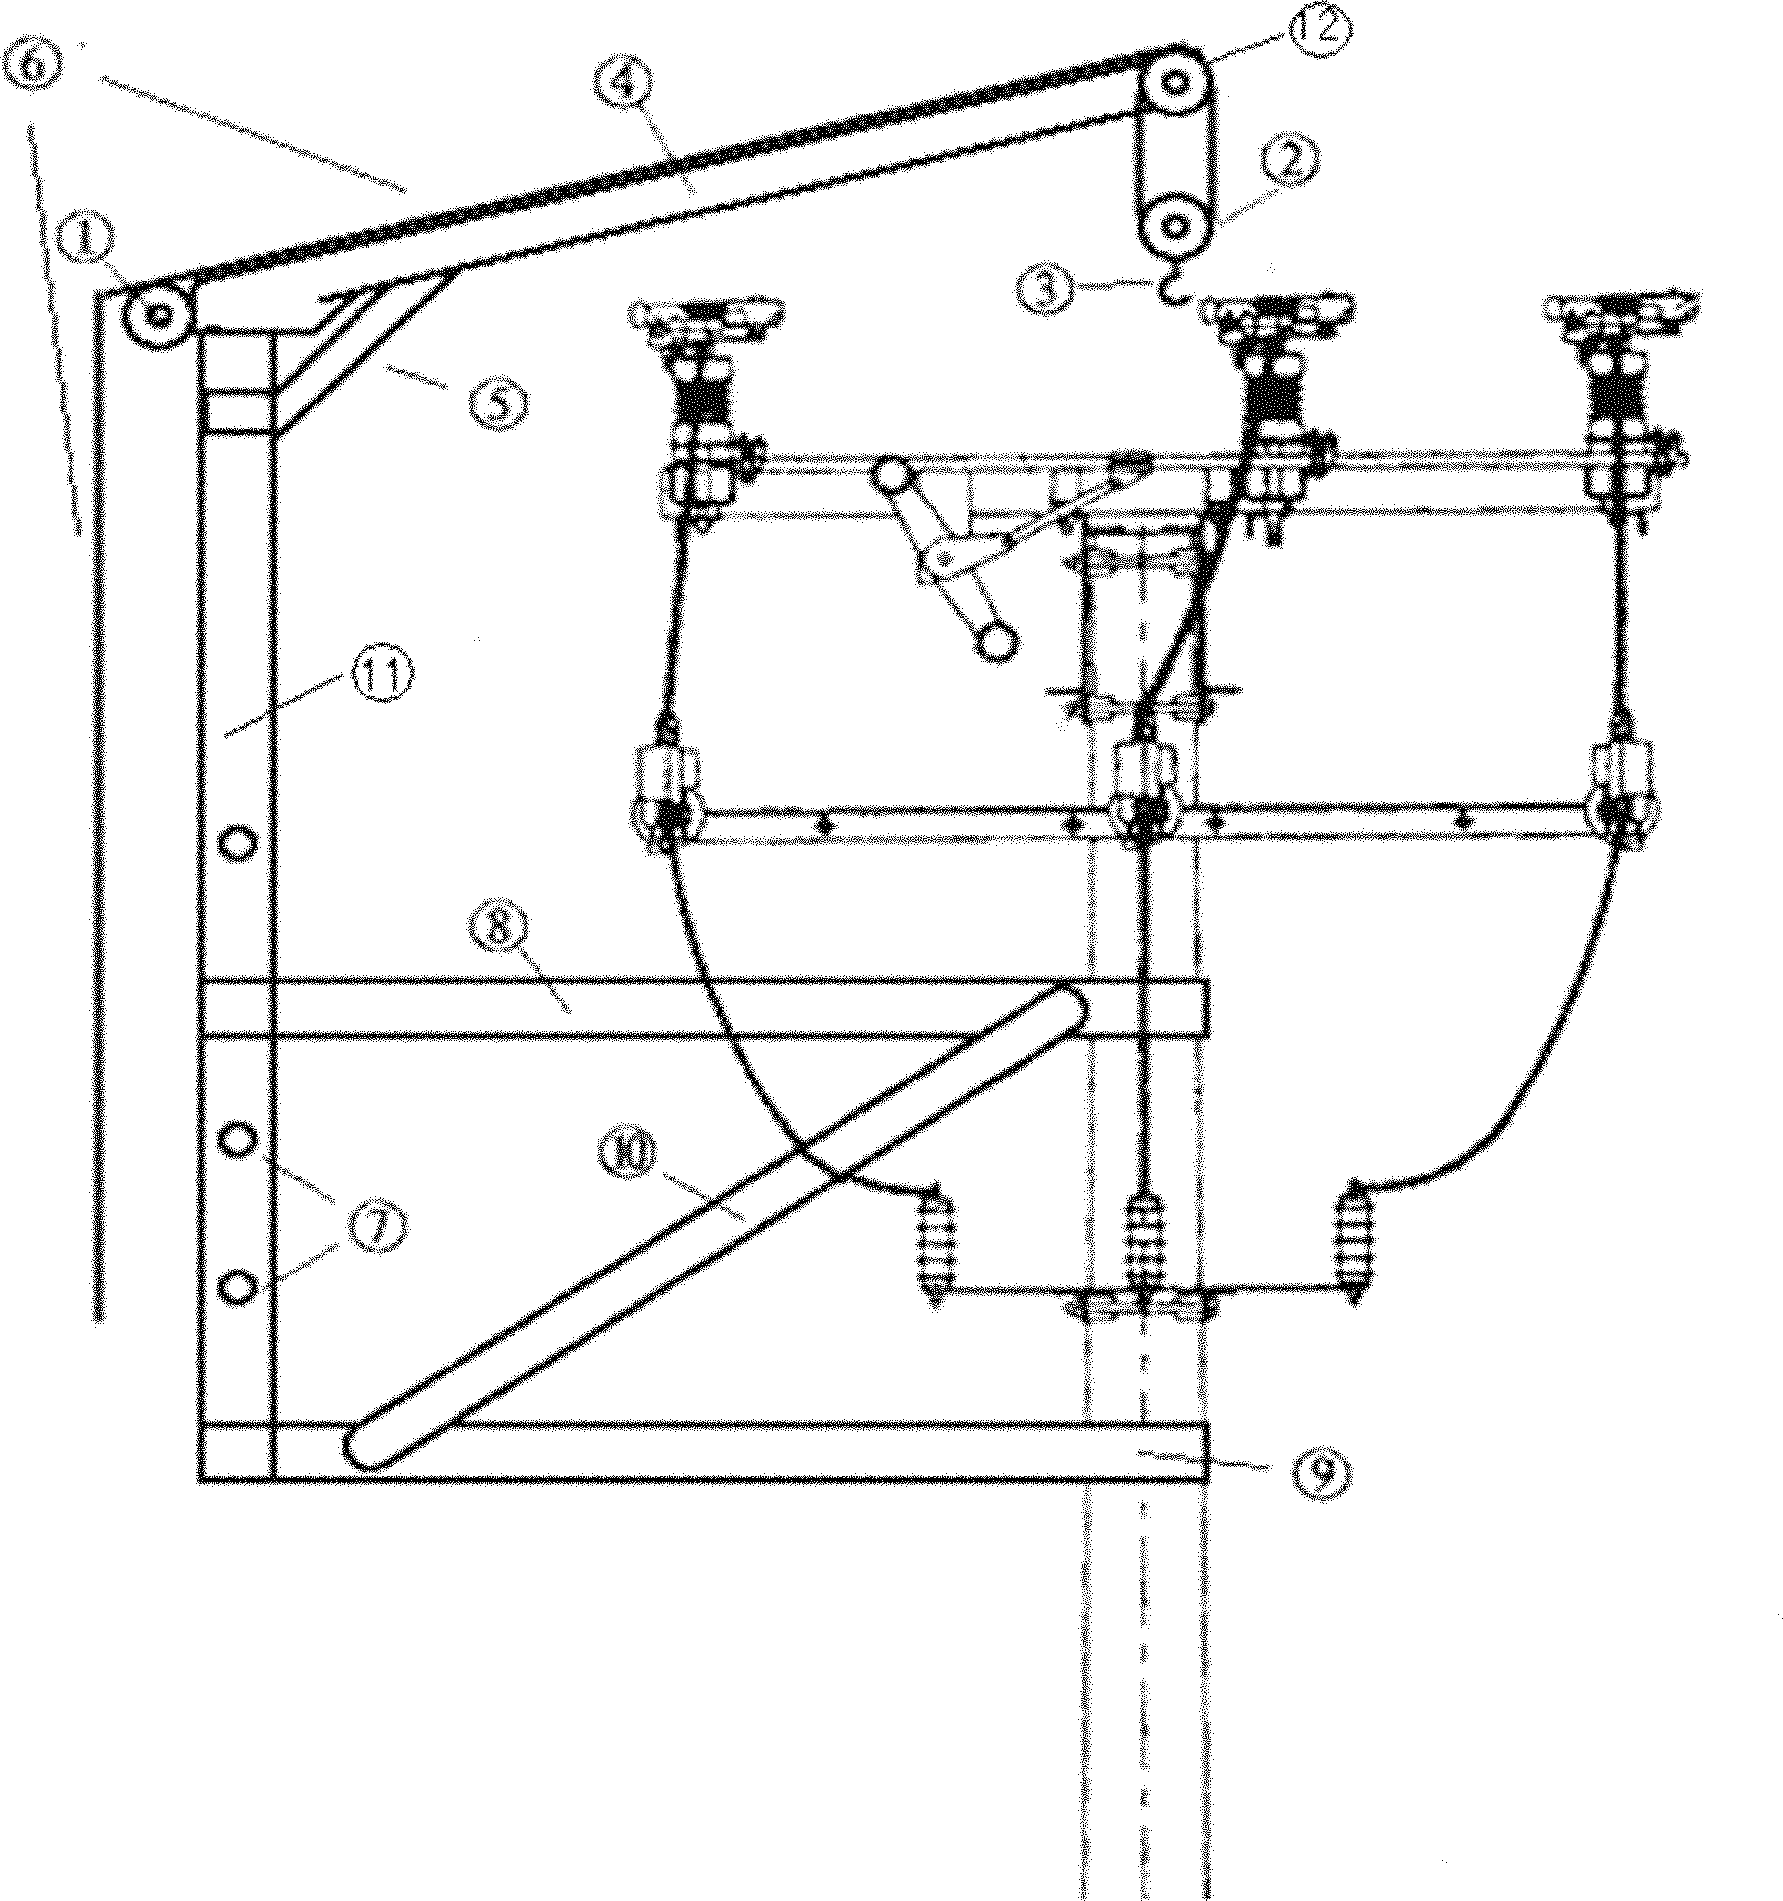 Ground potential rod cutter exchanging device